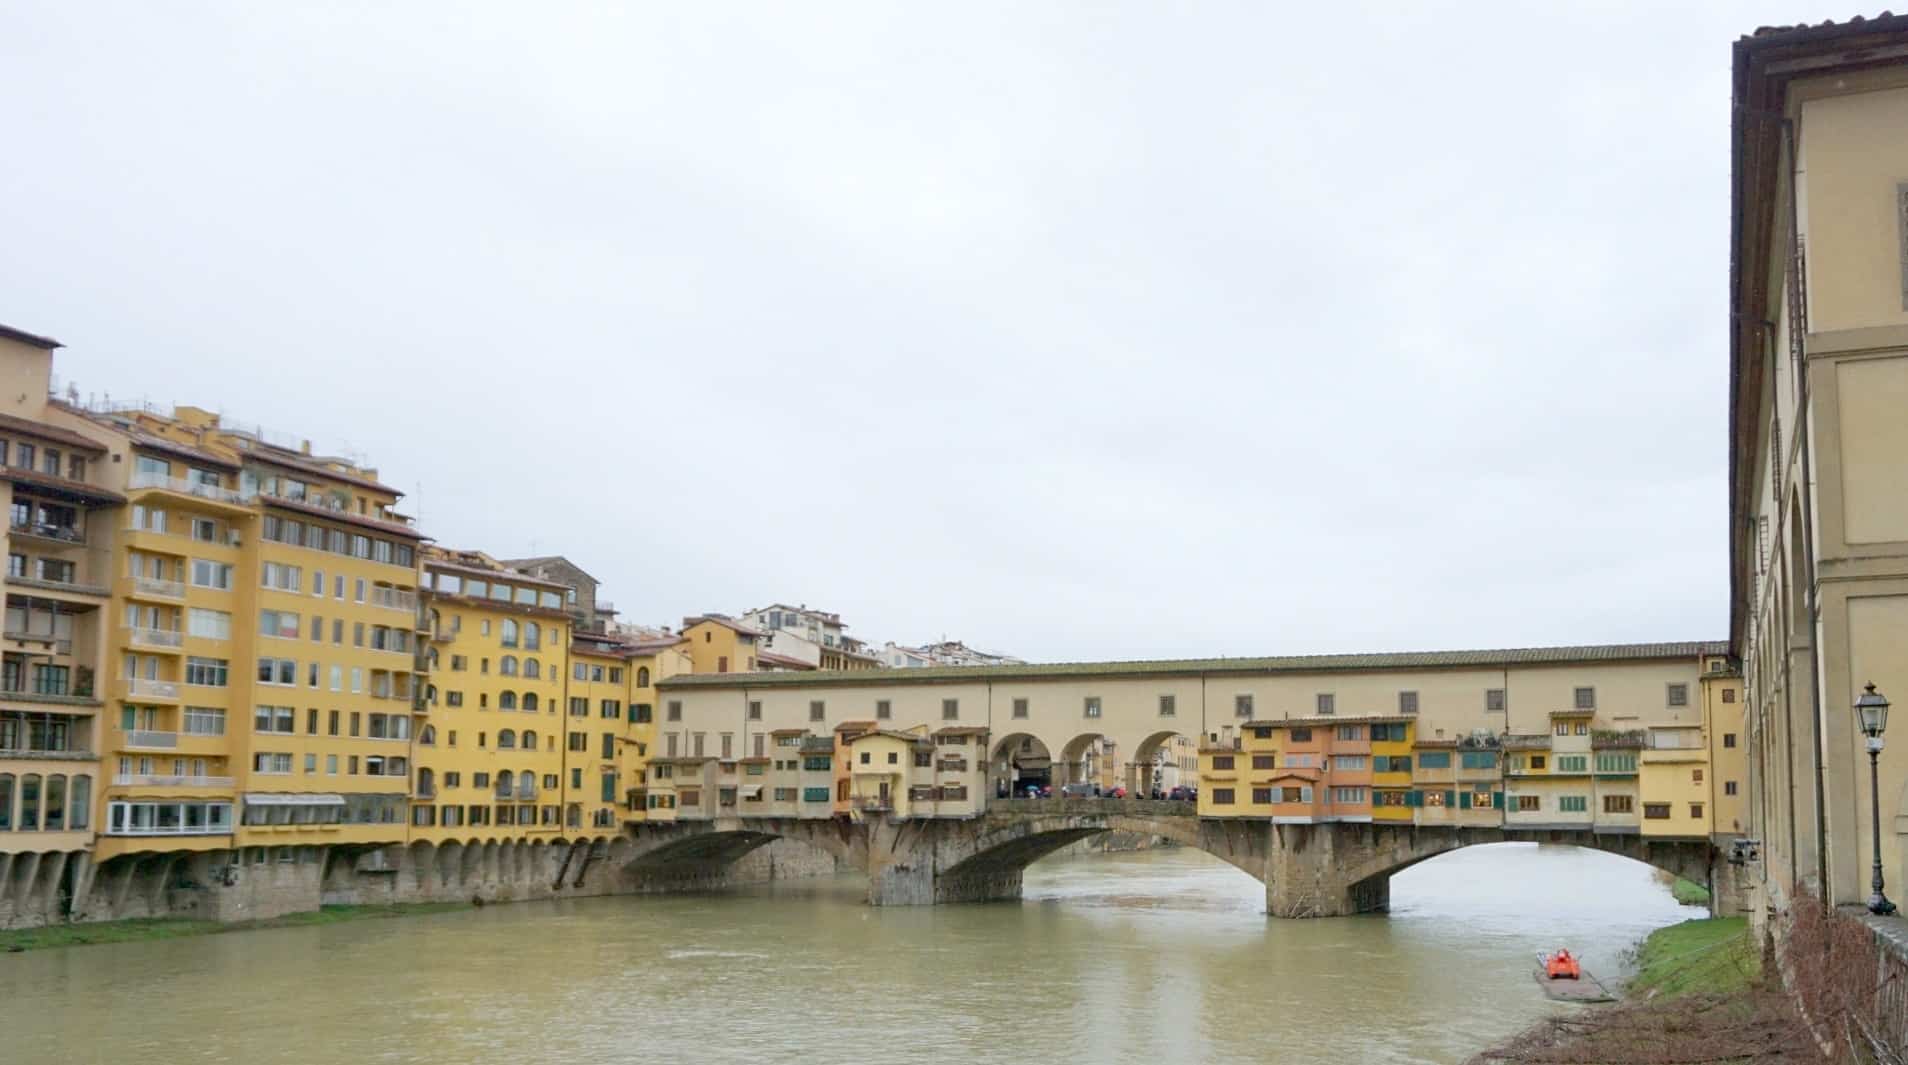 A guided tour can be tailored around the Ponte Vecchio Bridge 